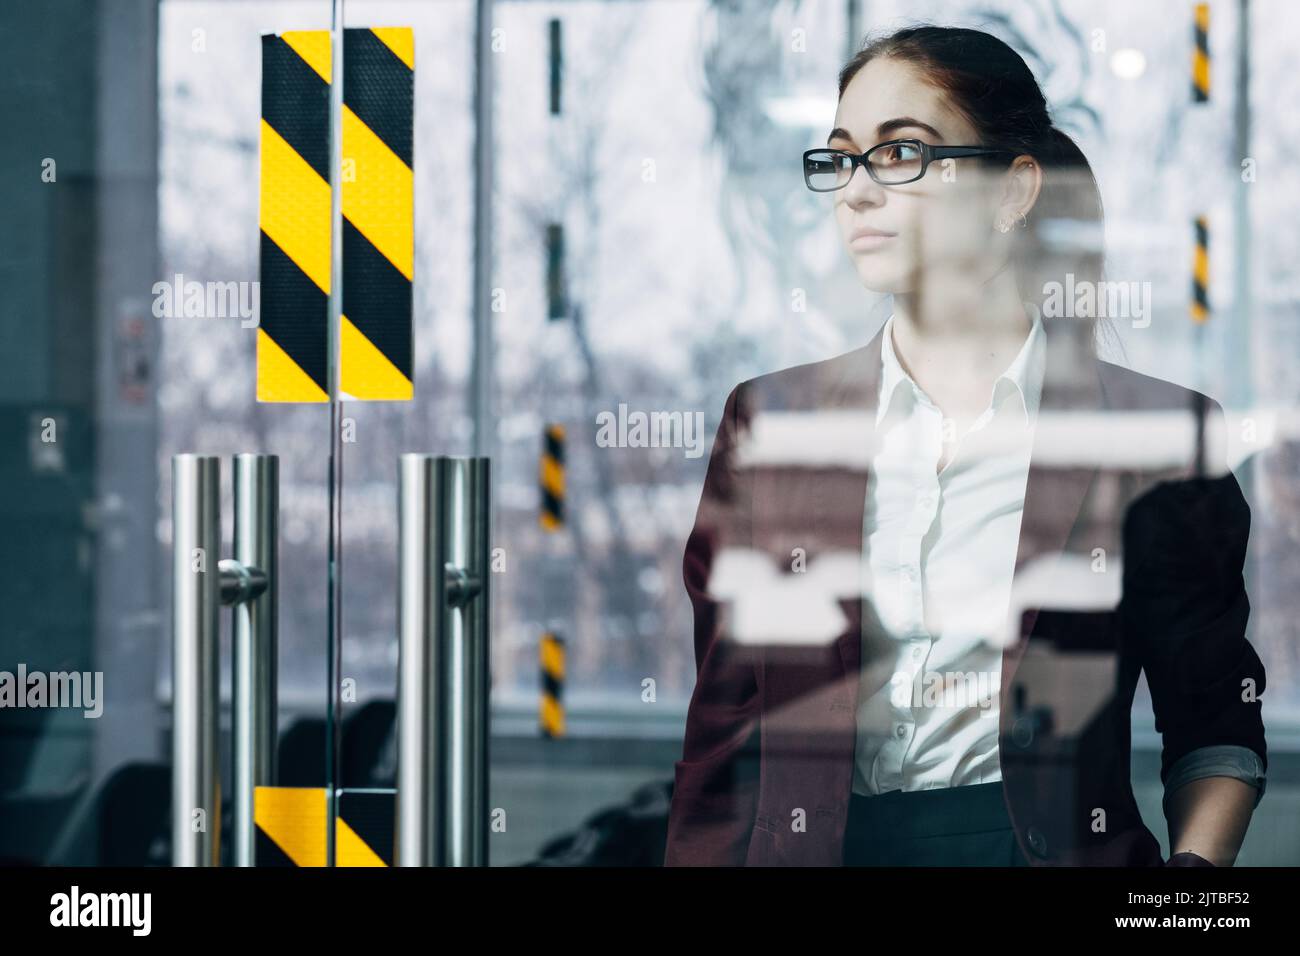 business millennial young woman office workspace Stock Photo